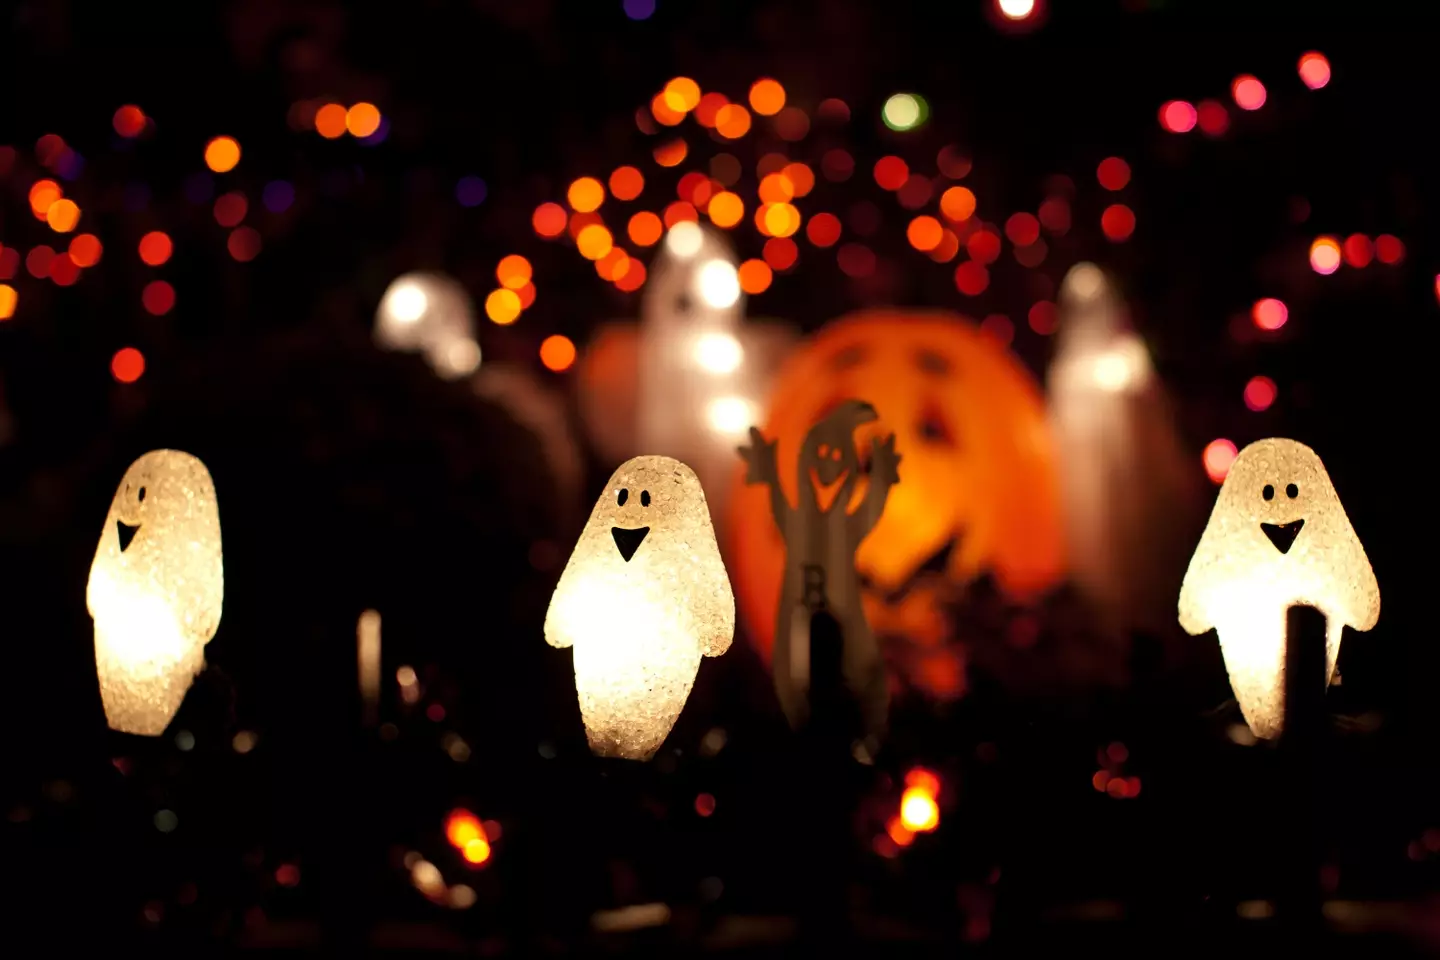 How scary is 'too scary' when it comes to Halloween decorations?